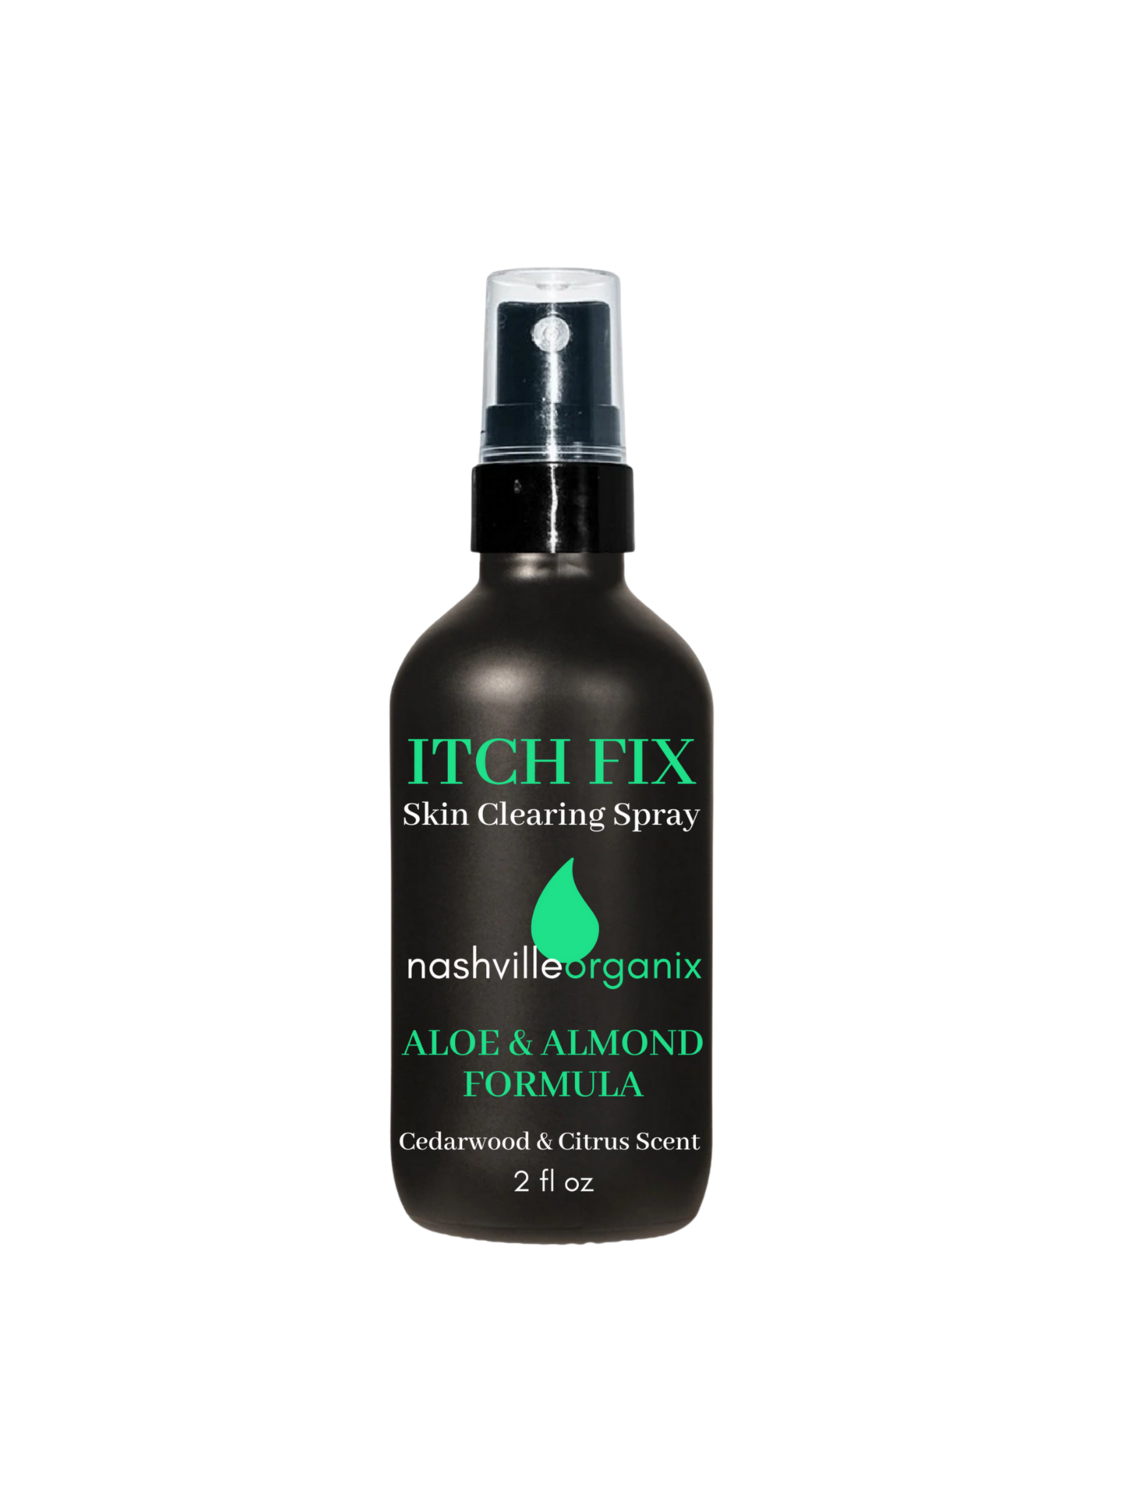 Itch Fix Skin Clearing Spray